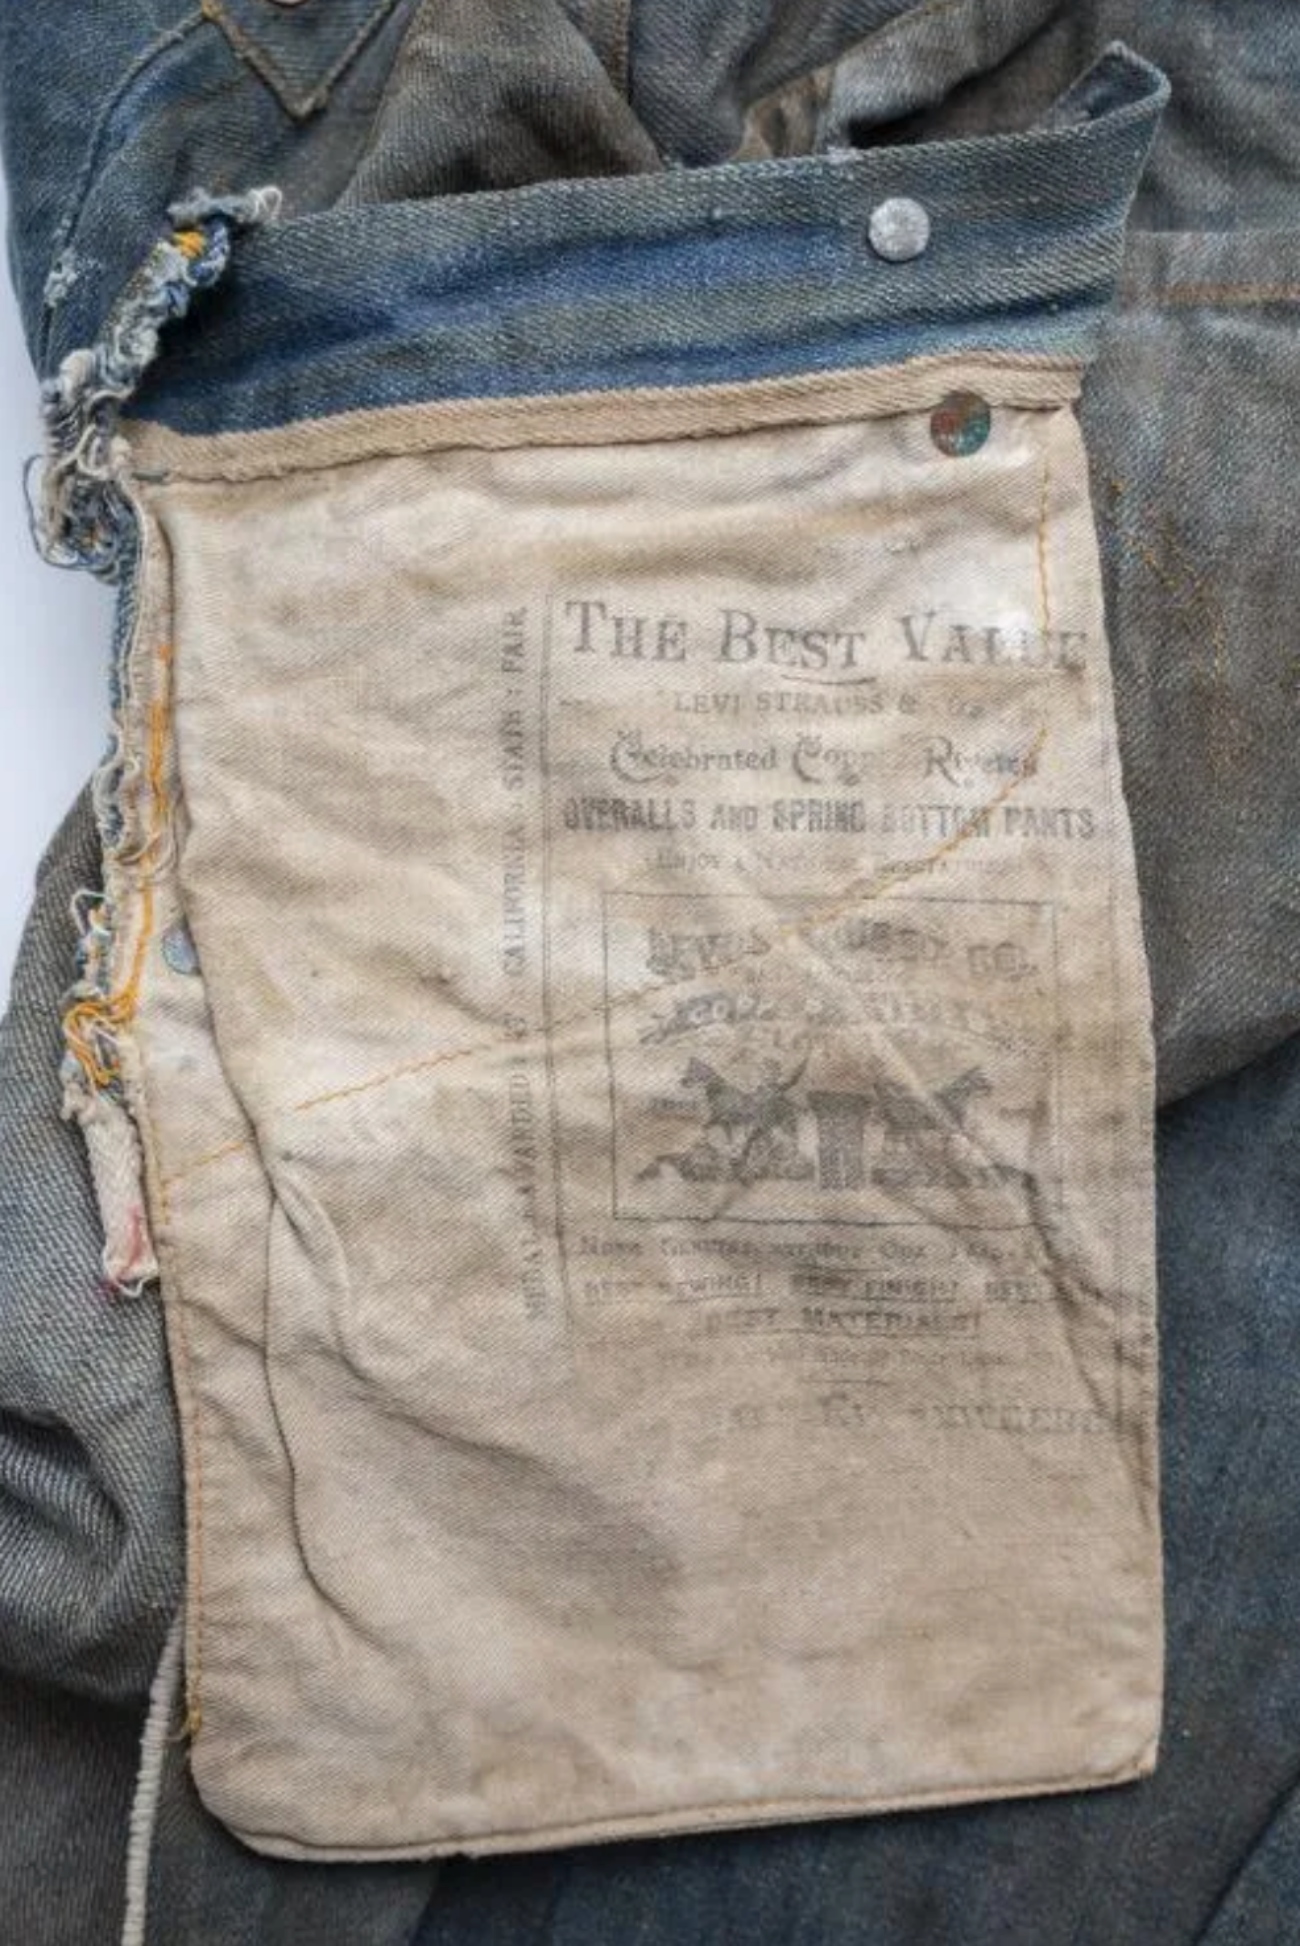 Levi's from 19th Century Auctioned for Record Price | Dusty Old Thing